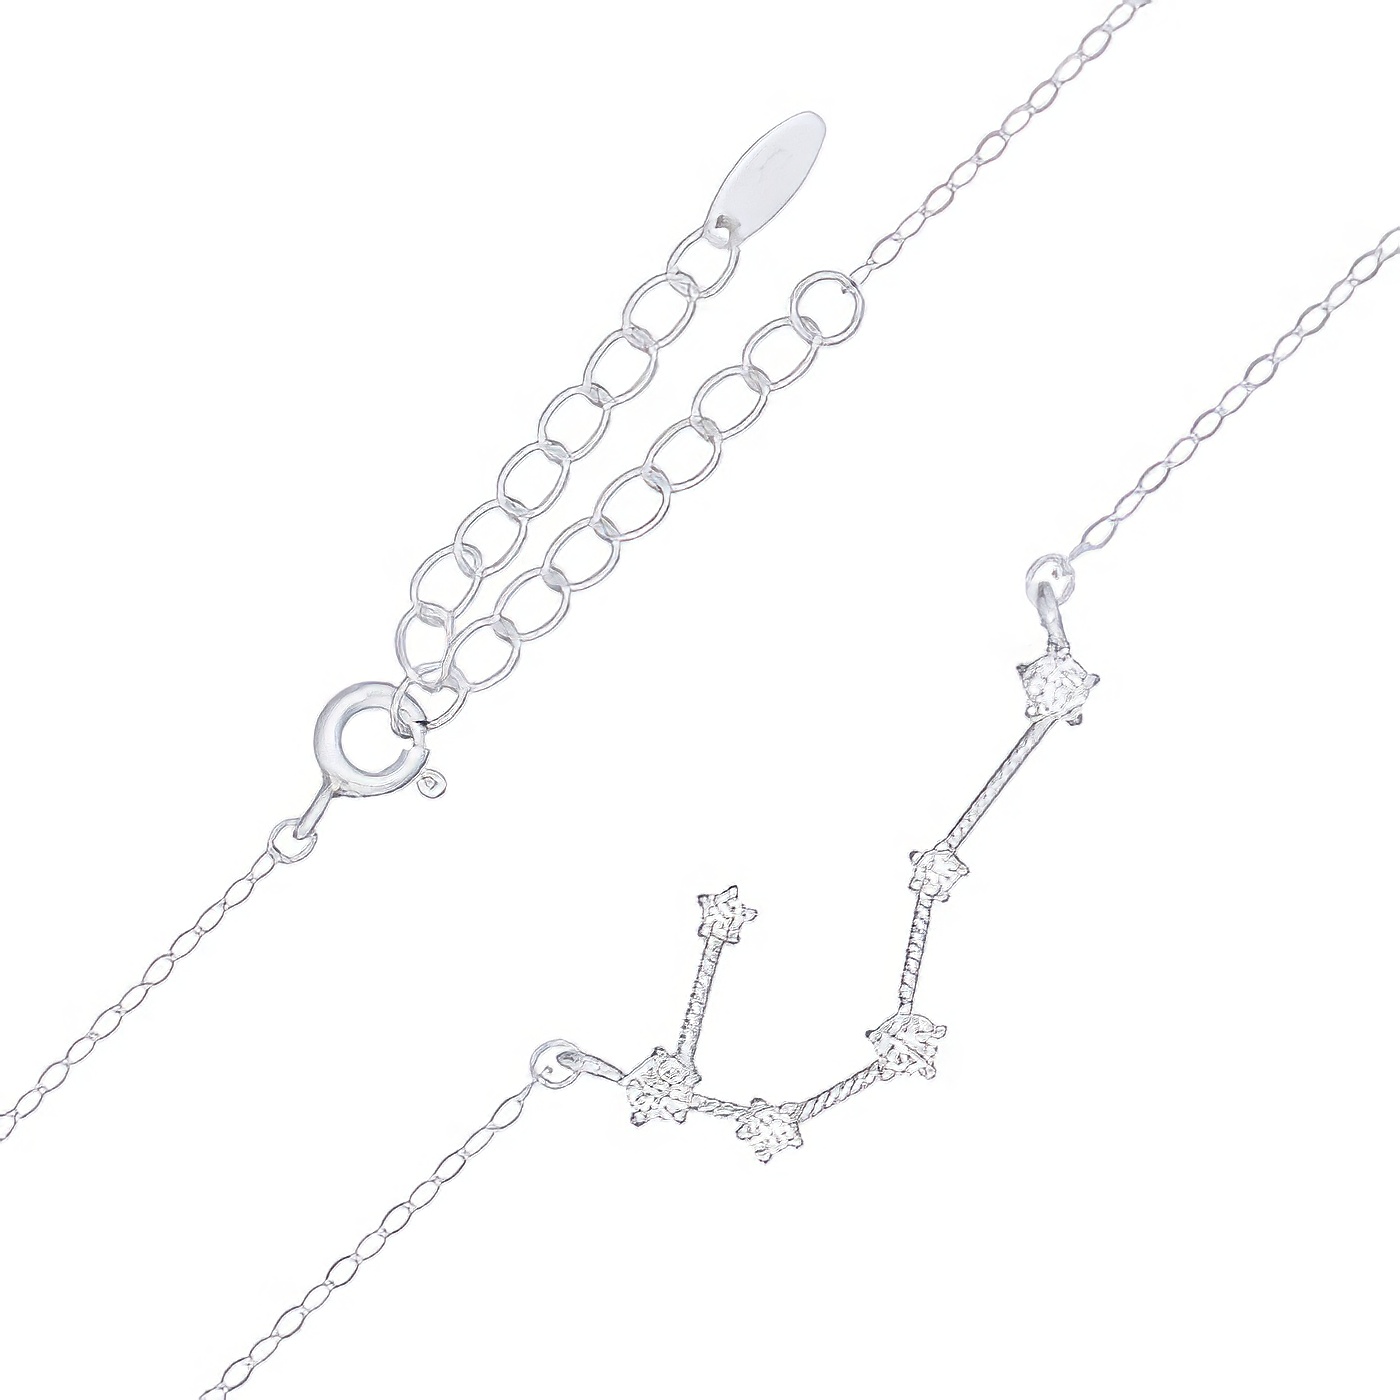 Cancer Star Constellation Rhodium Plated 925 Silver Necklace by BeYindi 